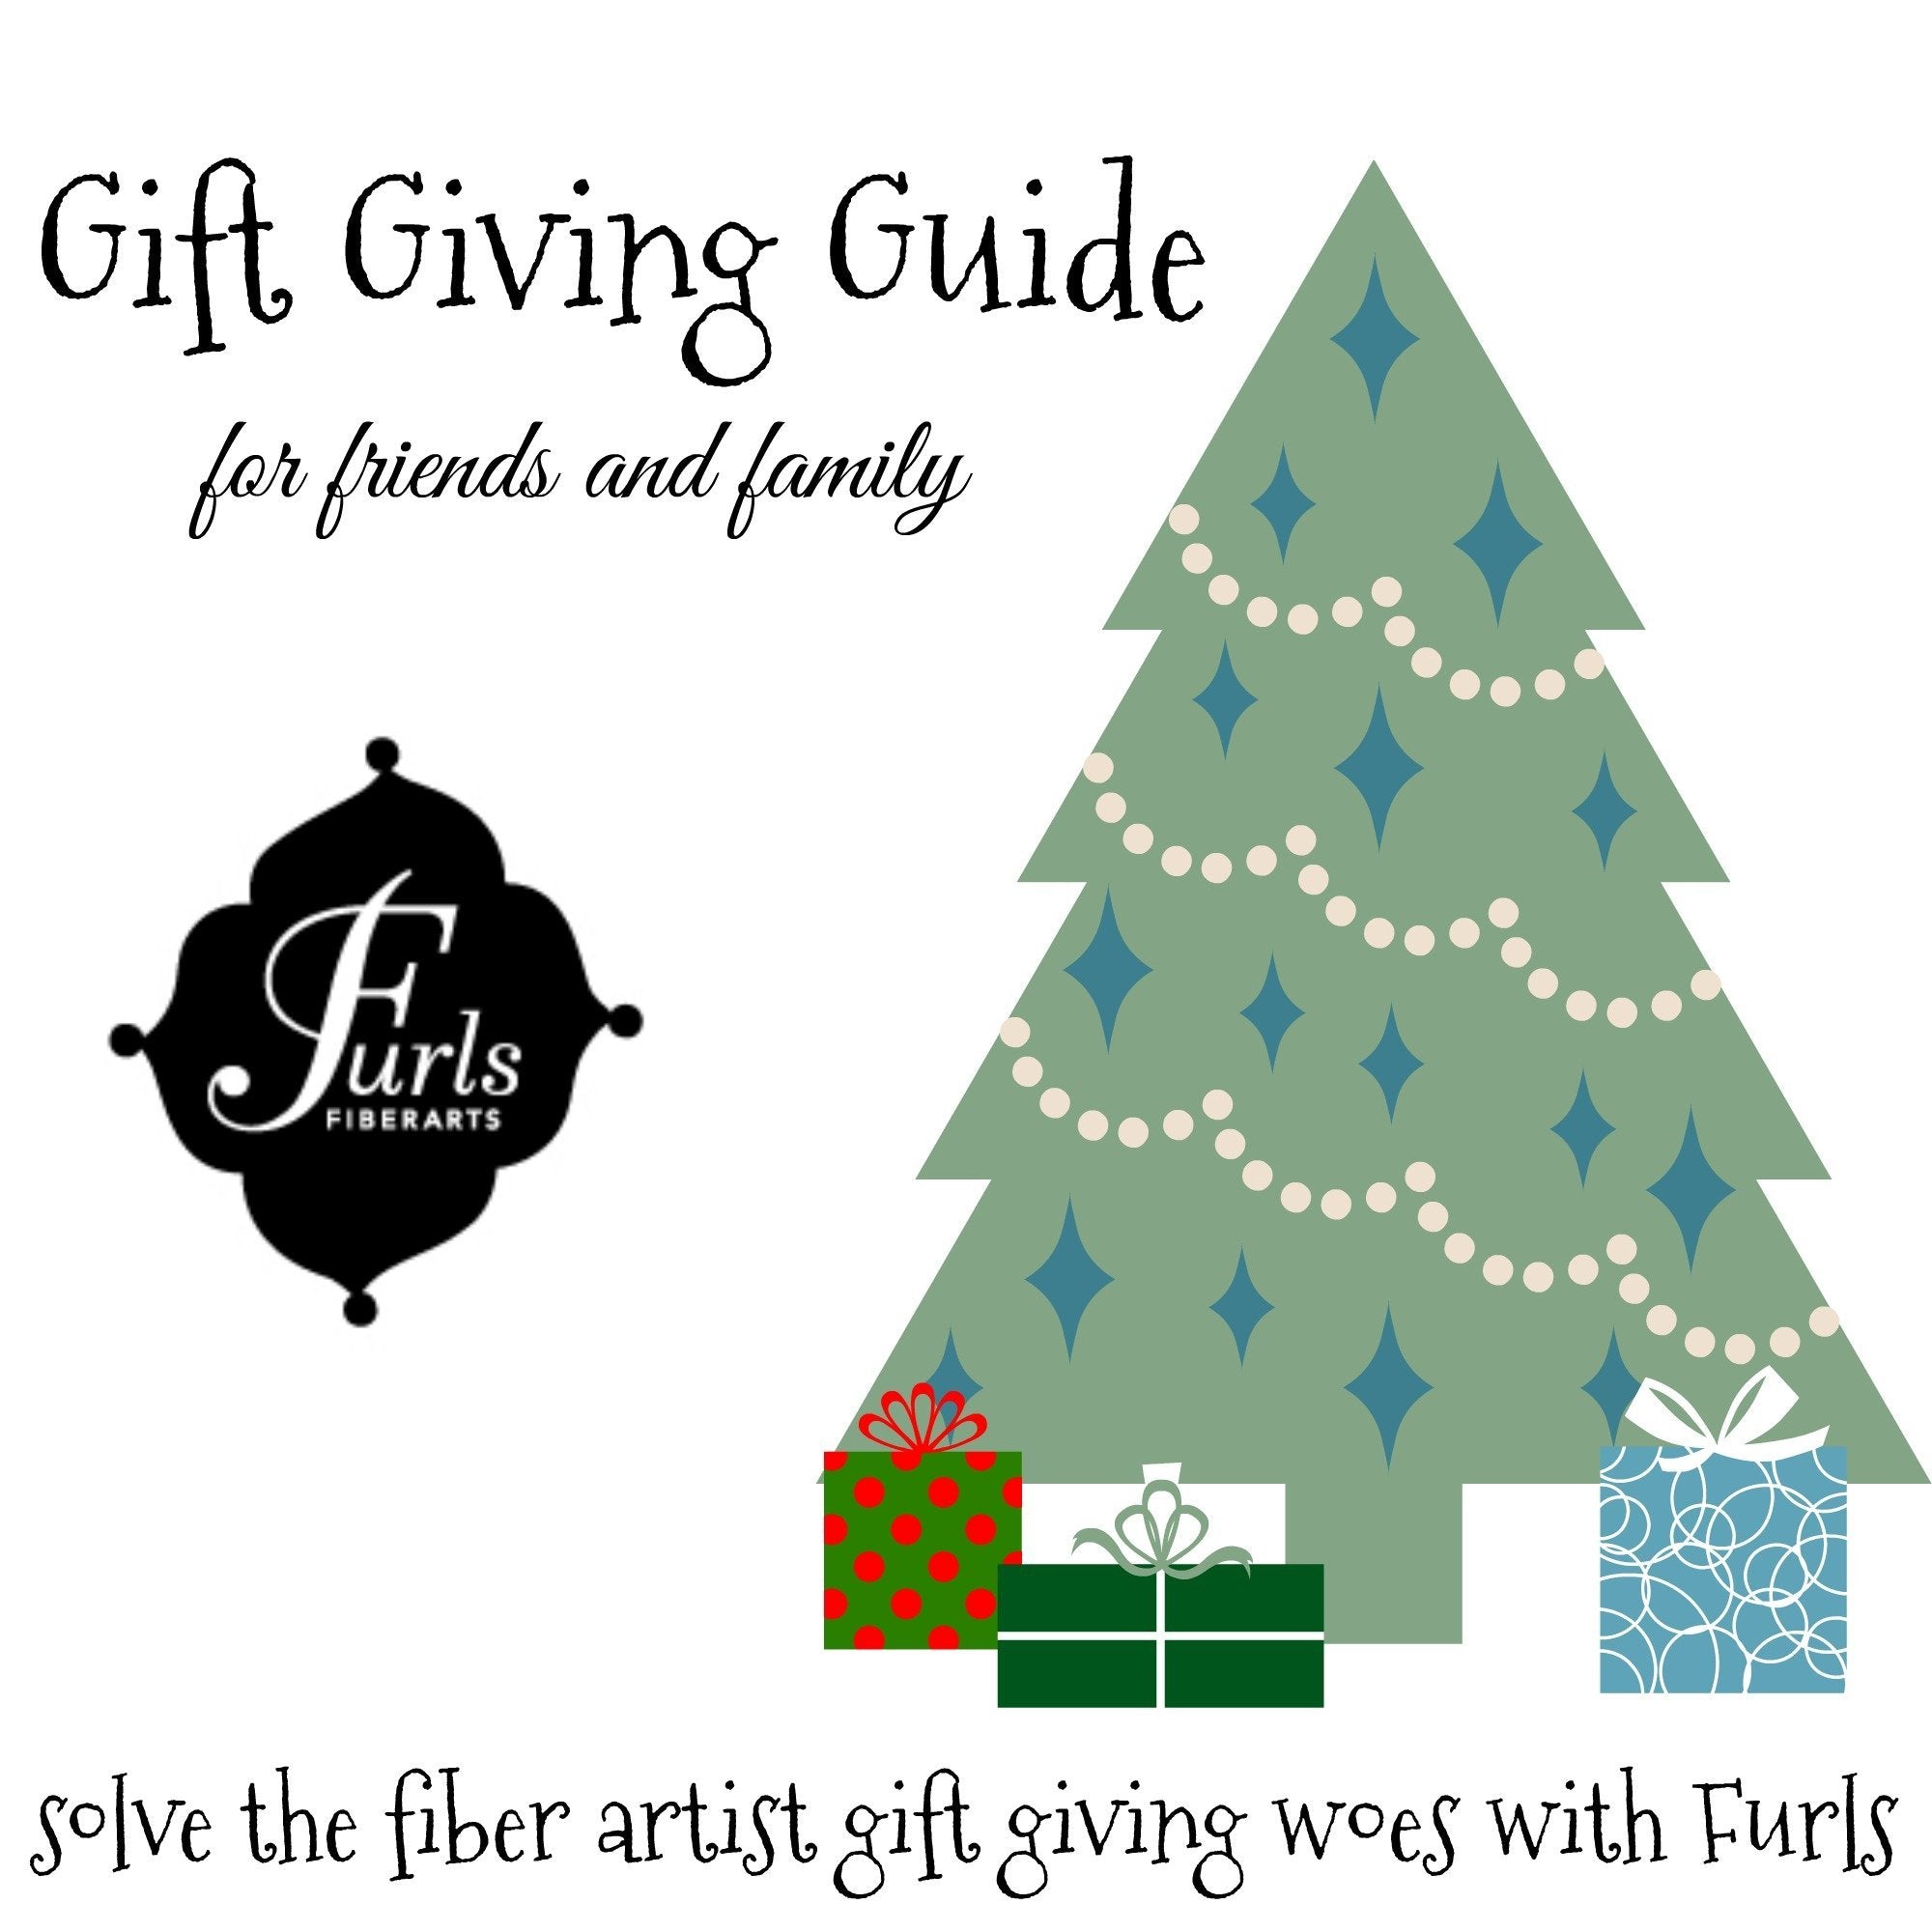 Gift Giving Guide for Friends and Family